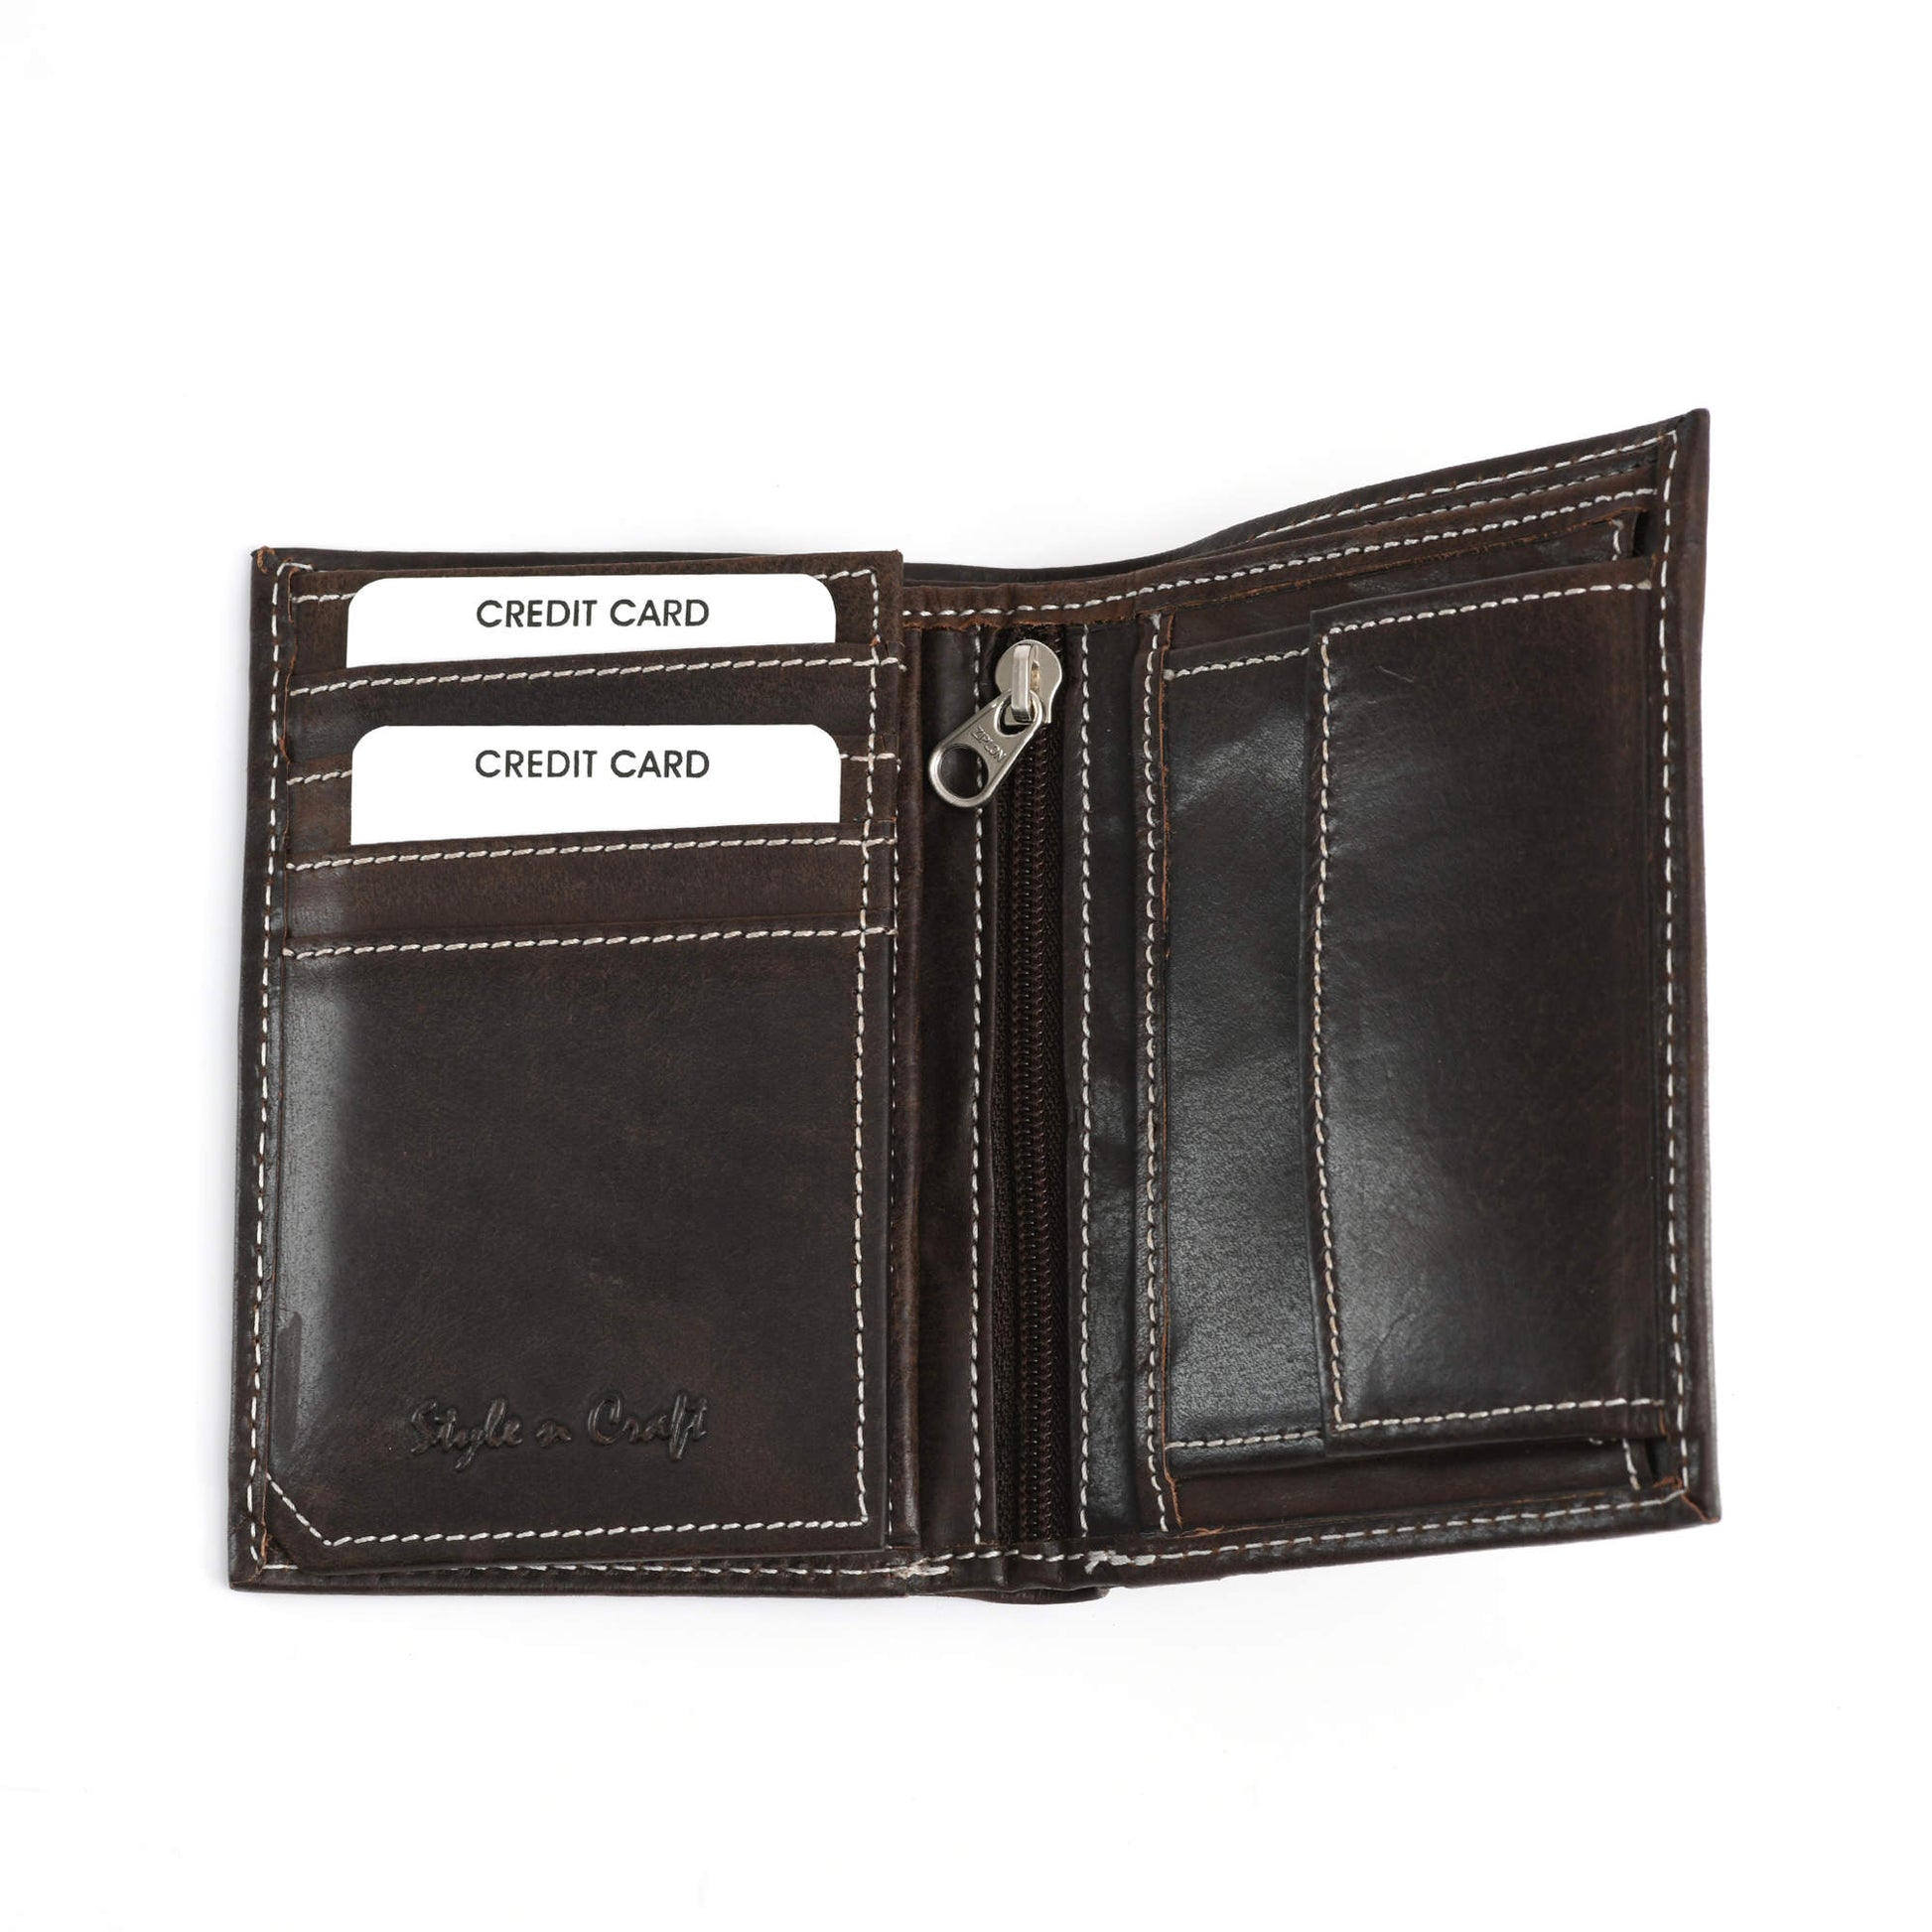 Style n Craft 391007 Bifold Hipster Leather Wallet with Inside Center Zipper, Left Flap & Coin Pocket in Dark Brown Color - Open View